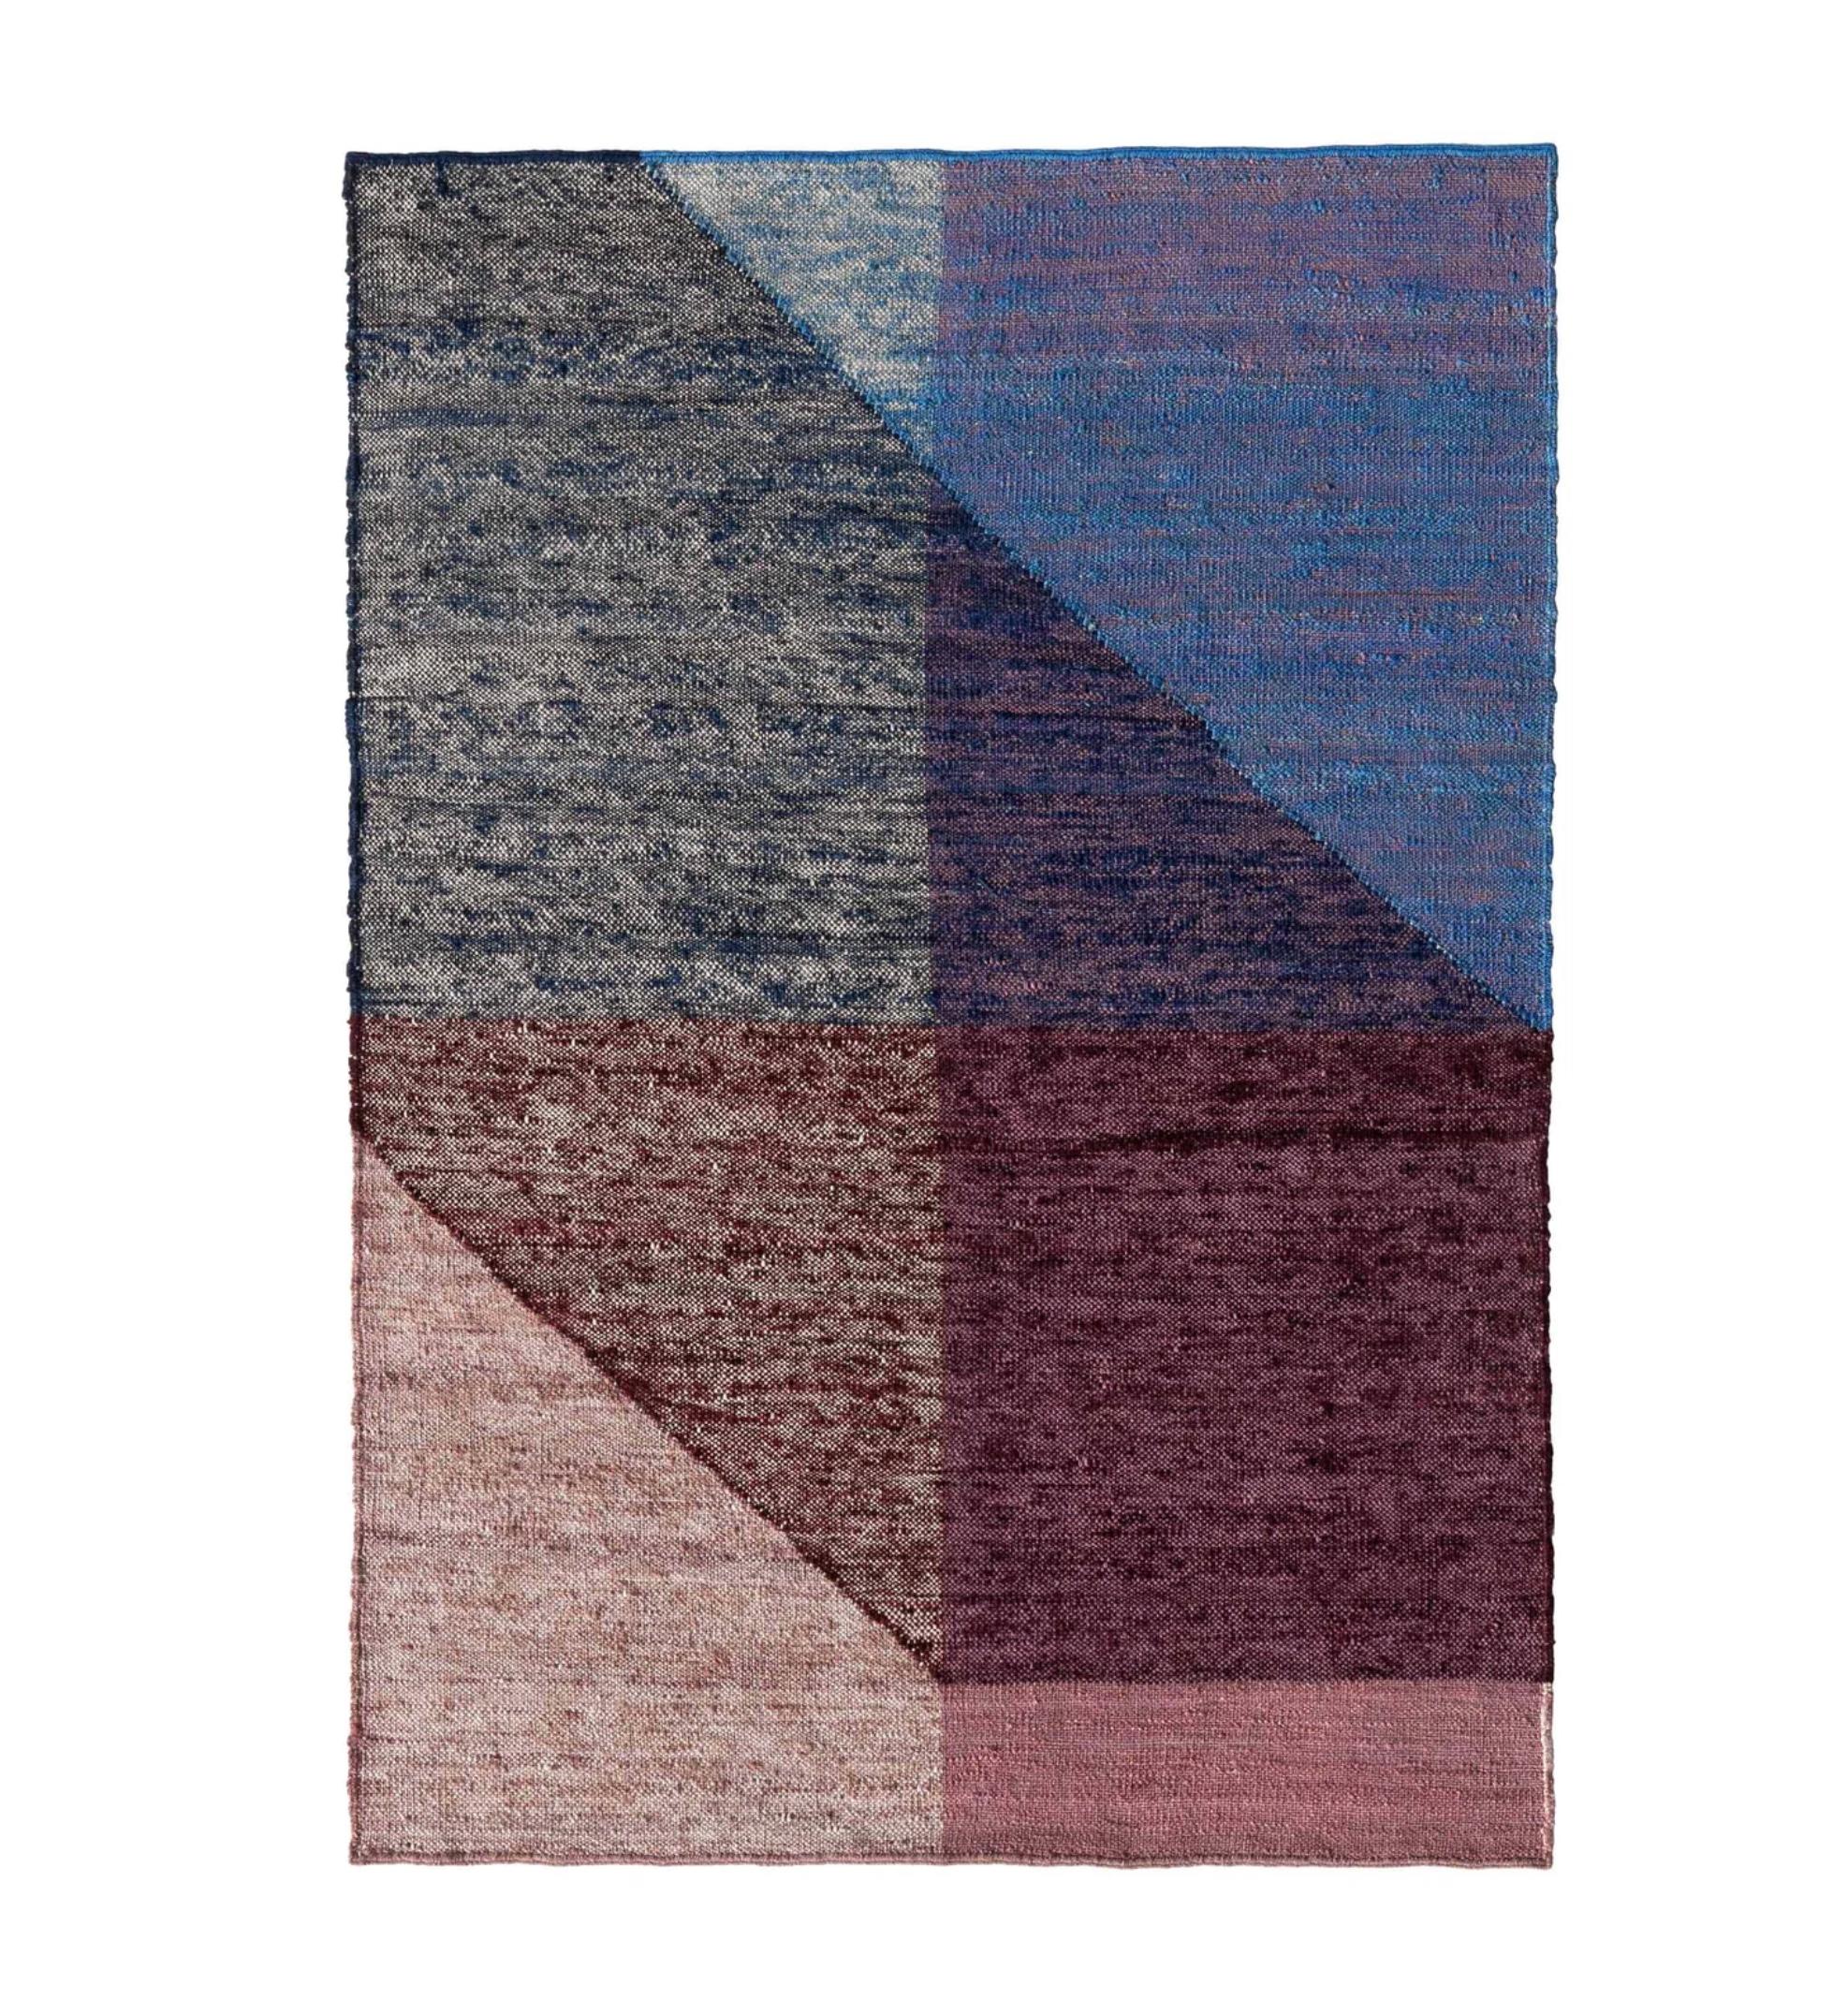 Mathias Hahn 'Capas 3' Kilim Rug for Nanimarquina. Current production, Spain.

By using layers, Mathias Han manages to create a variety of tonalities, textures and shades. This is a light and informal rug, hand-woven using the ancestral Kilim